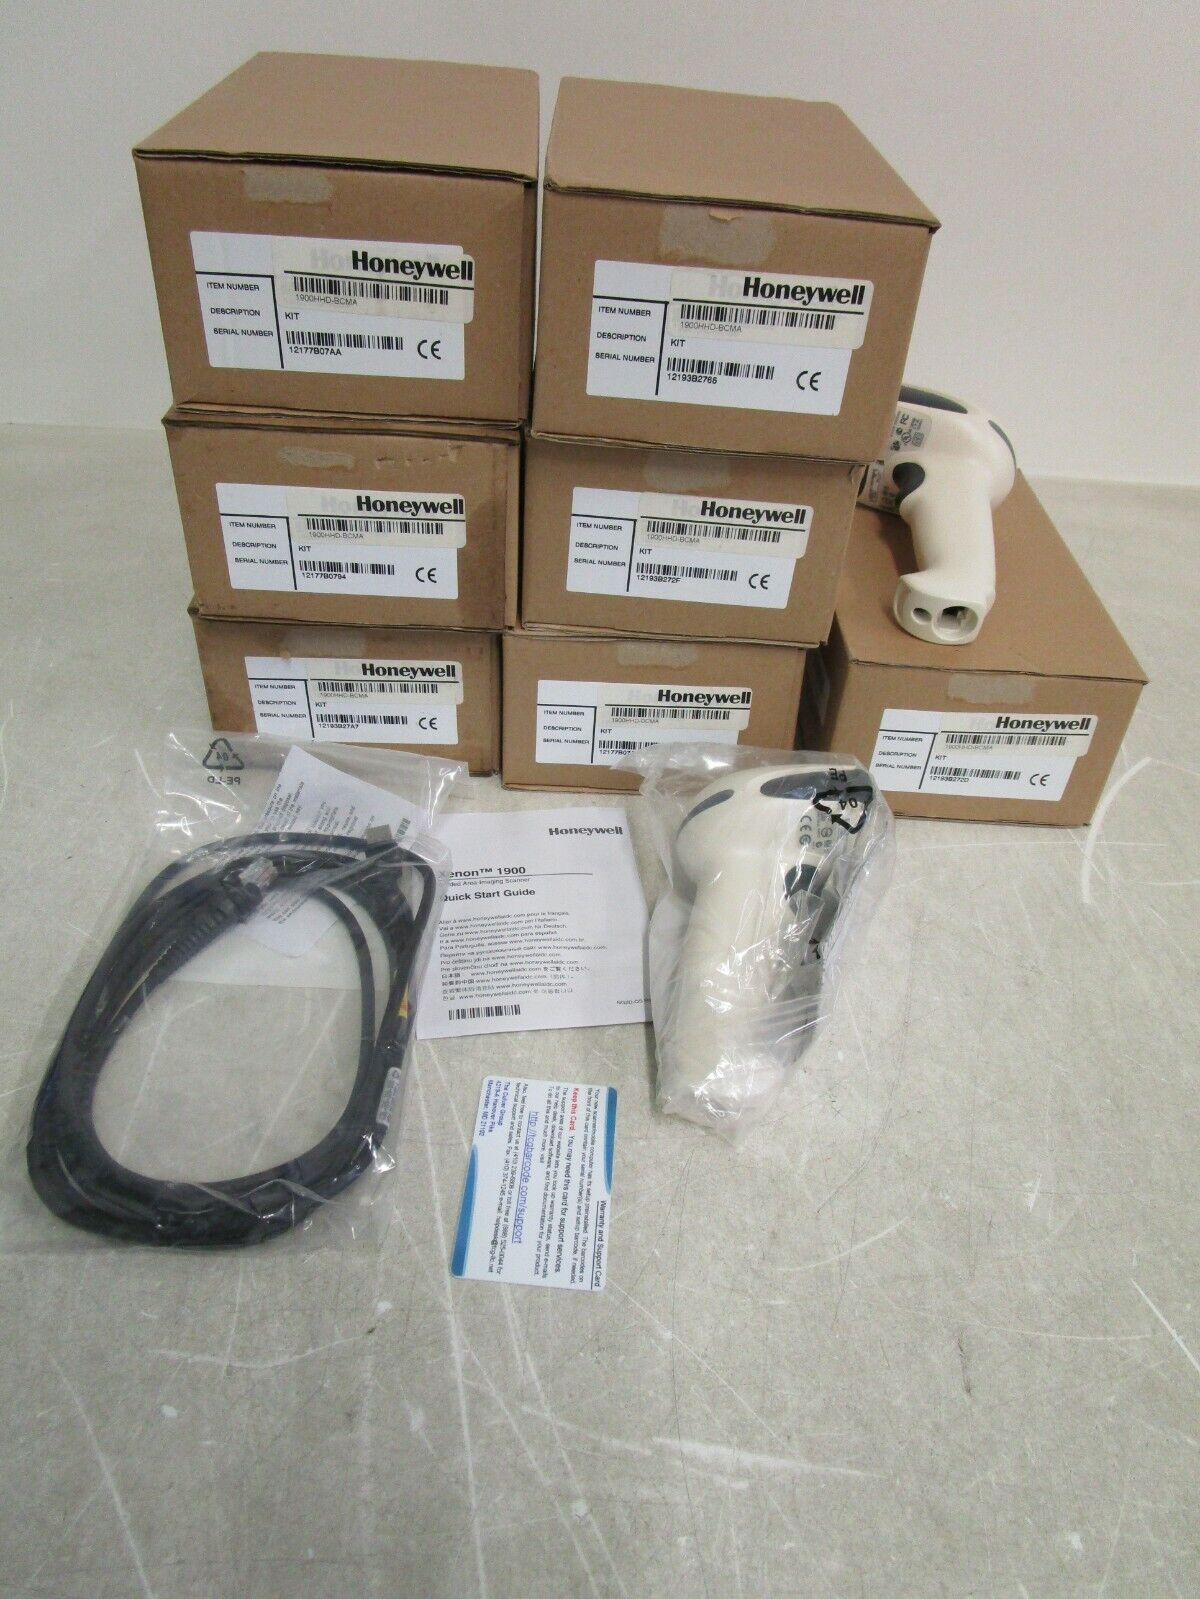 Honeywell Xenon 1900 USB Barcode Scanner Lot of 7 New Open Boxes